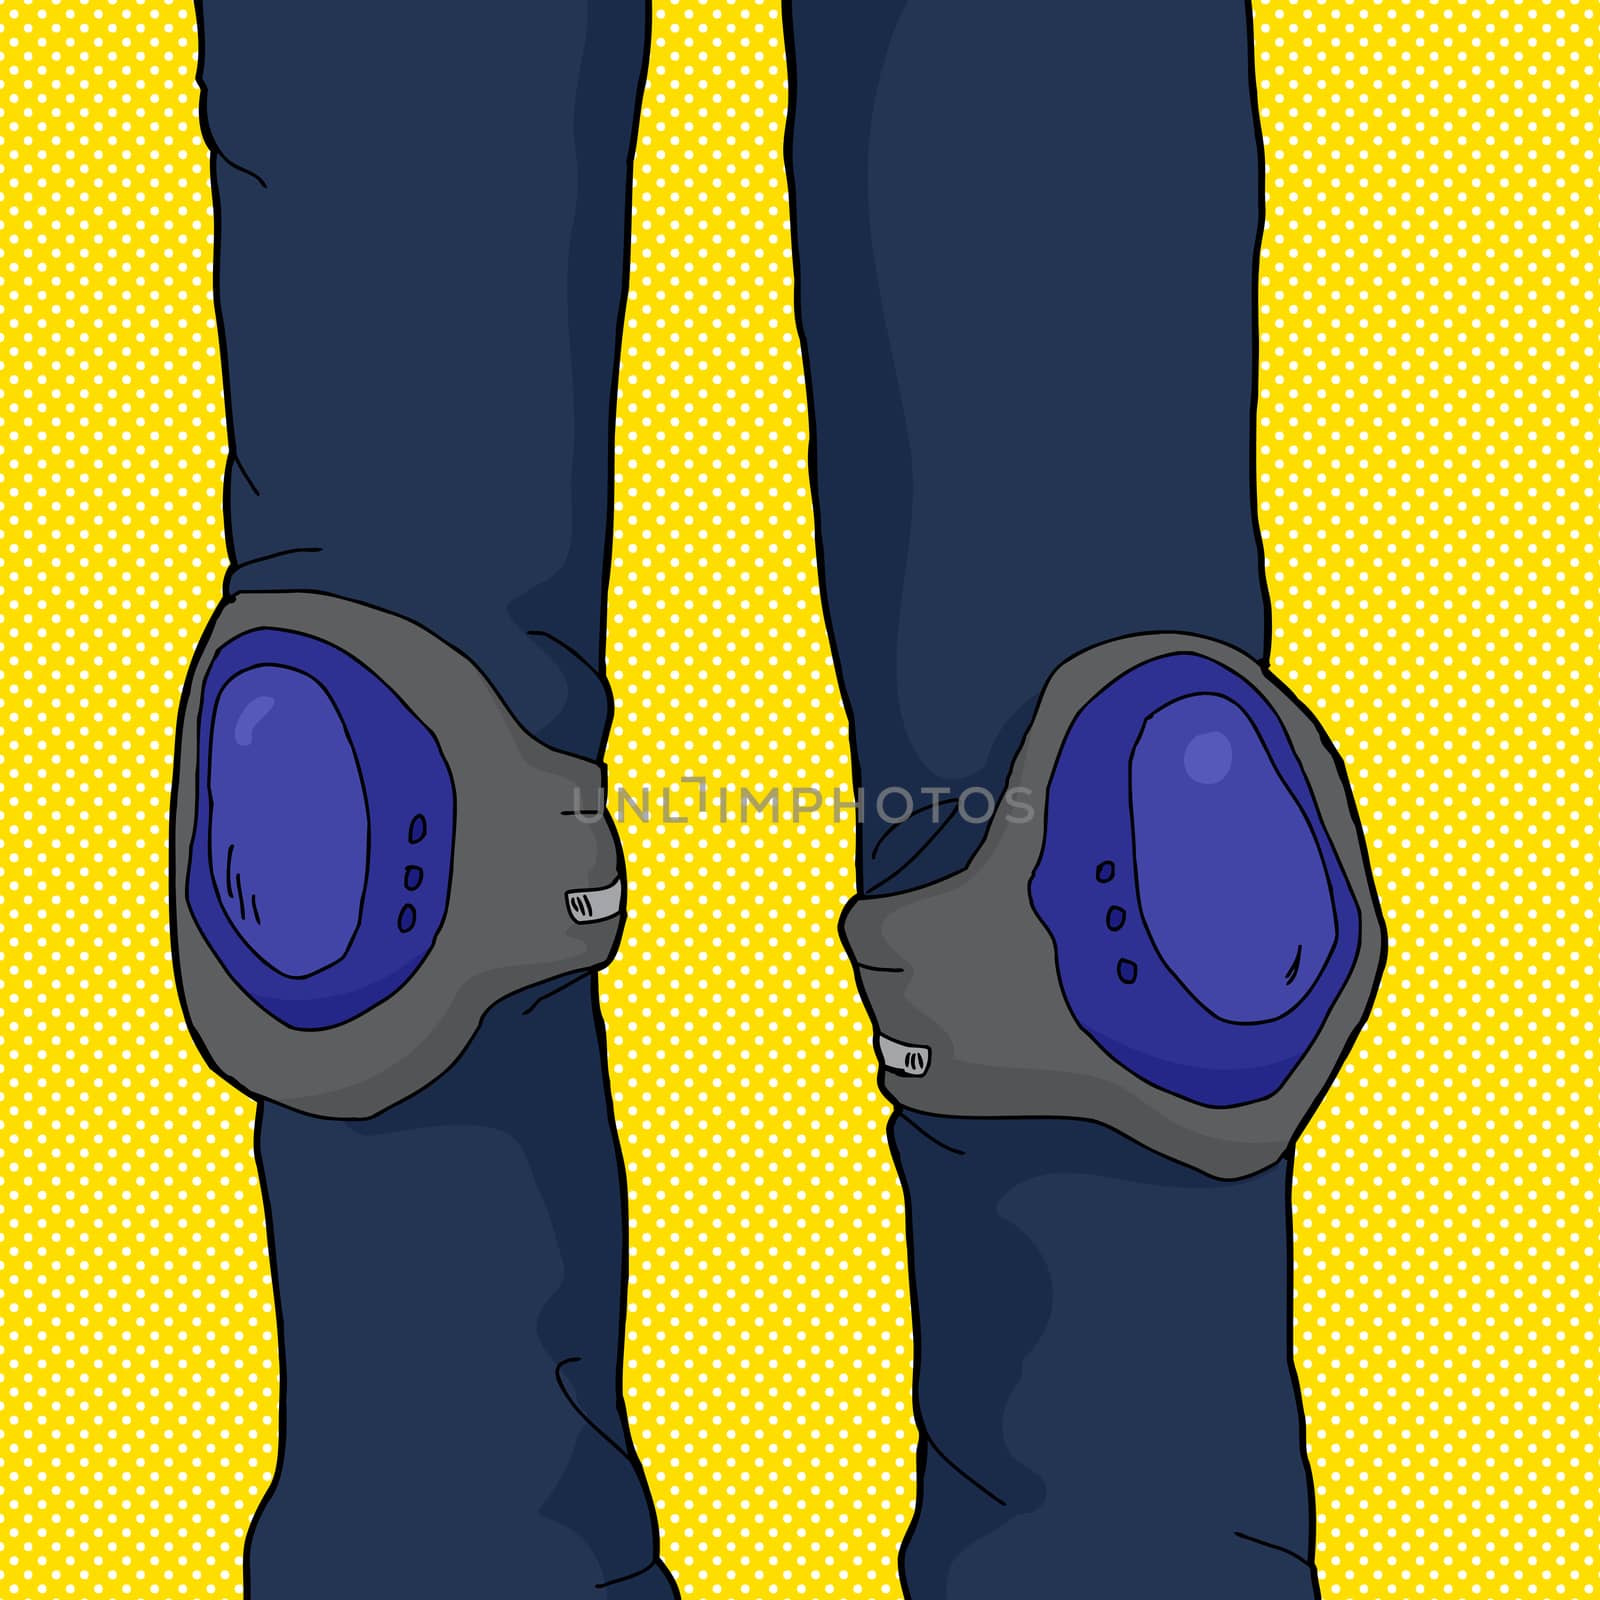 Person Wearing Knee Pads by TheBlackRhino